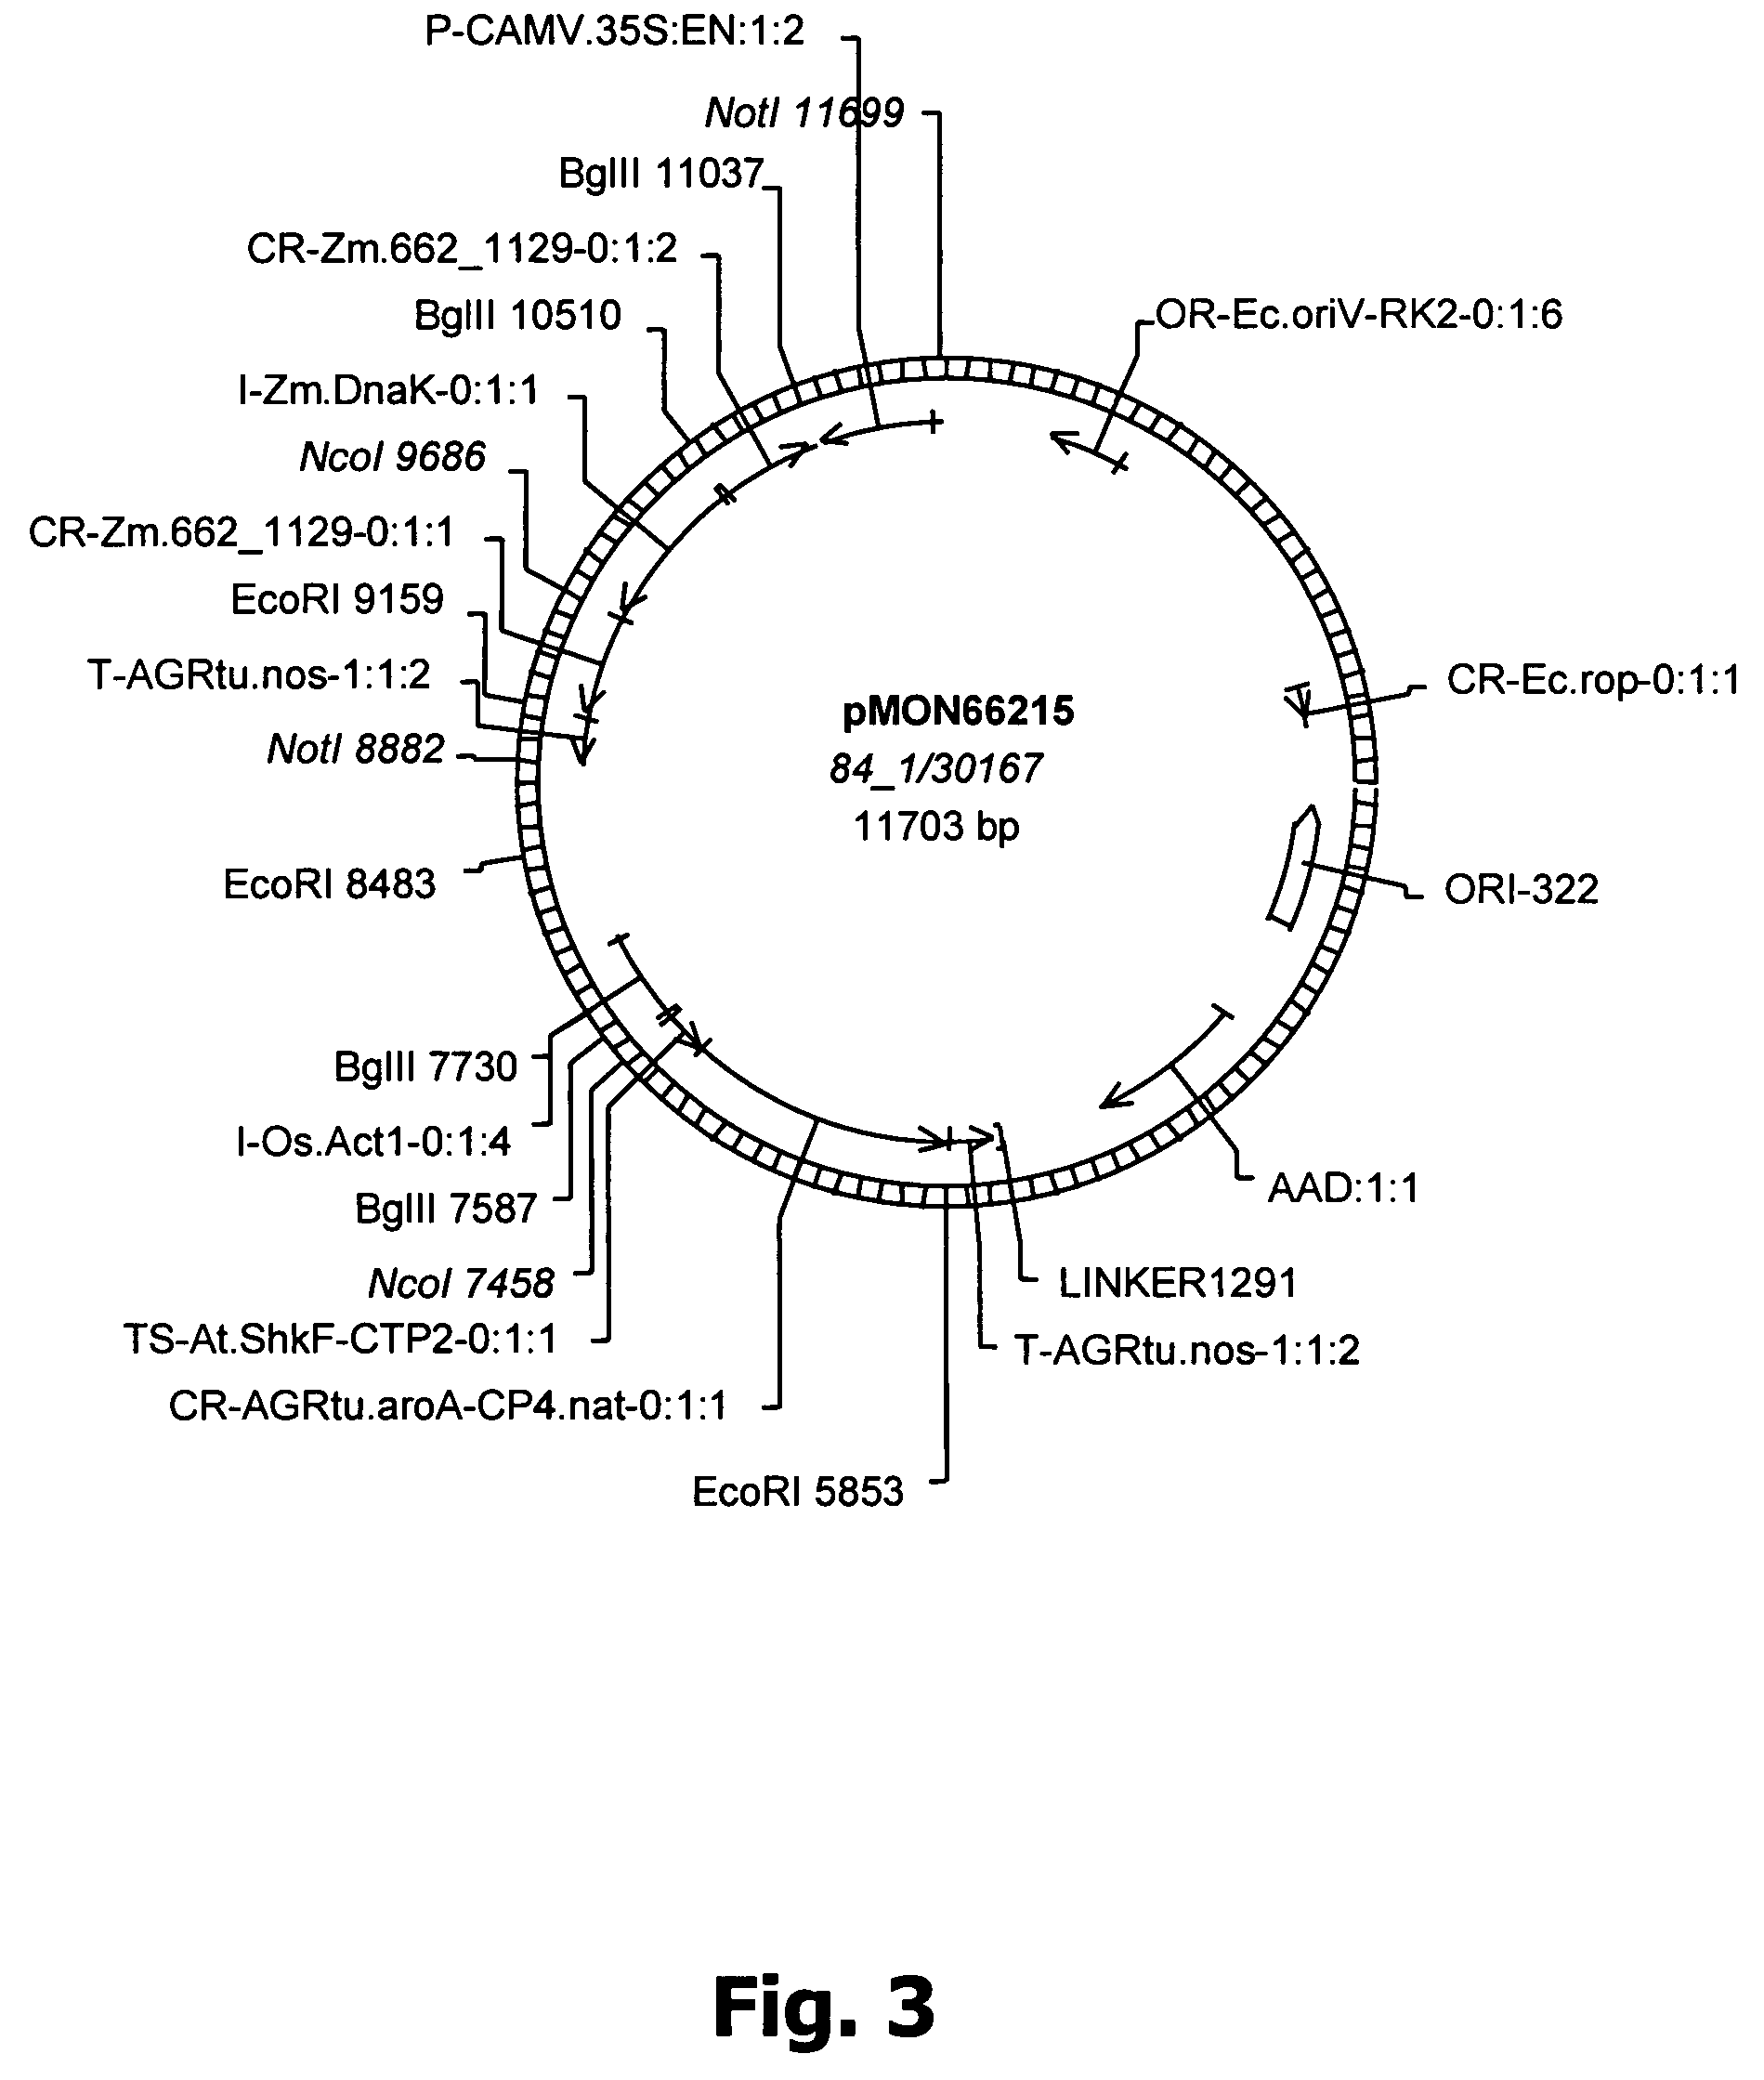 Method for altering nitrogen or oil content of seeds by down regulating AGL11 expression or activity